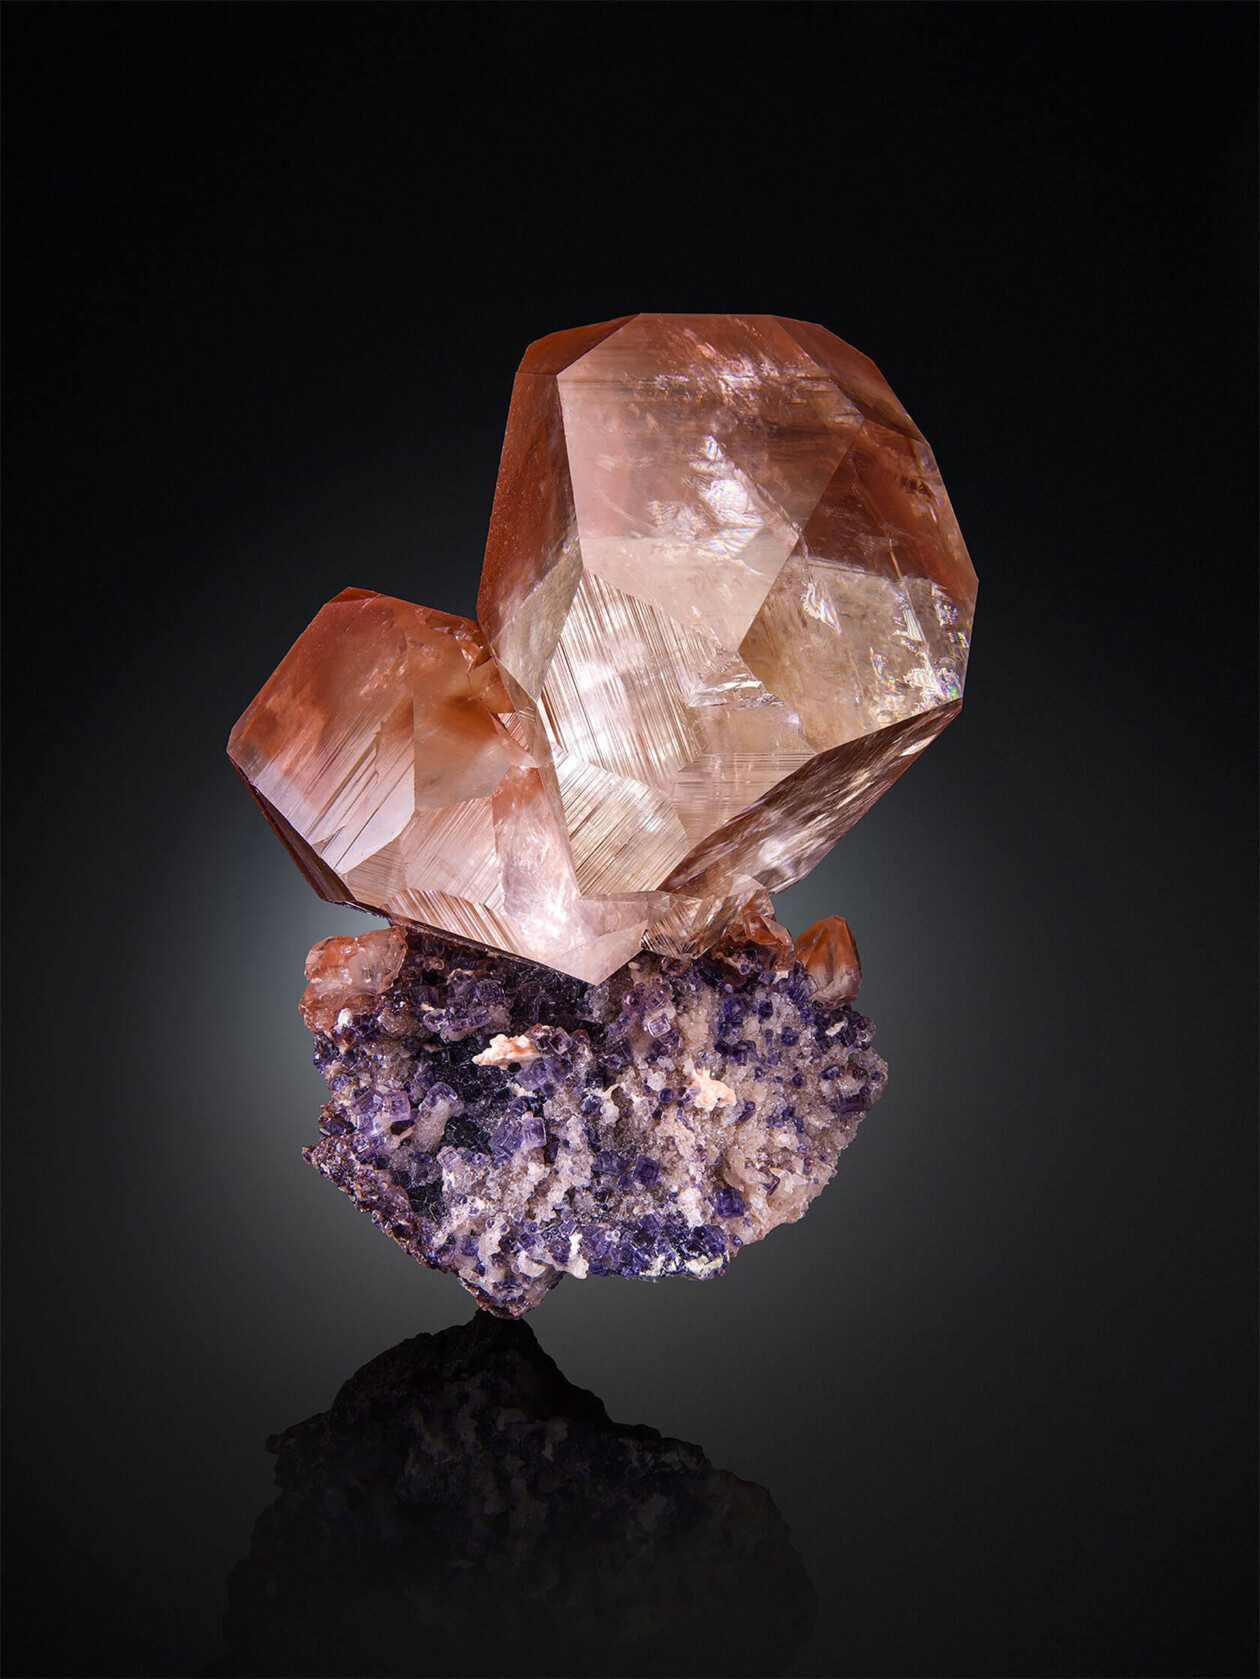 The Magnificent Mineral Photography Of Laszlo Kupi (22)